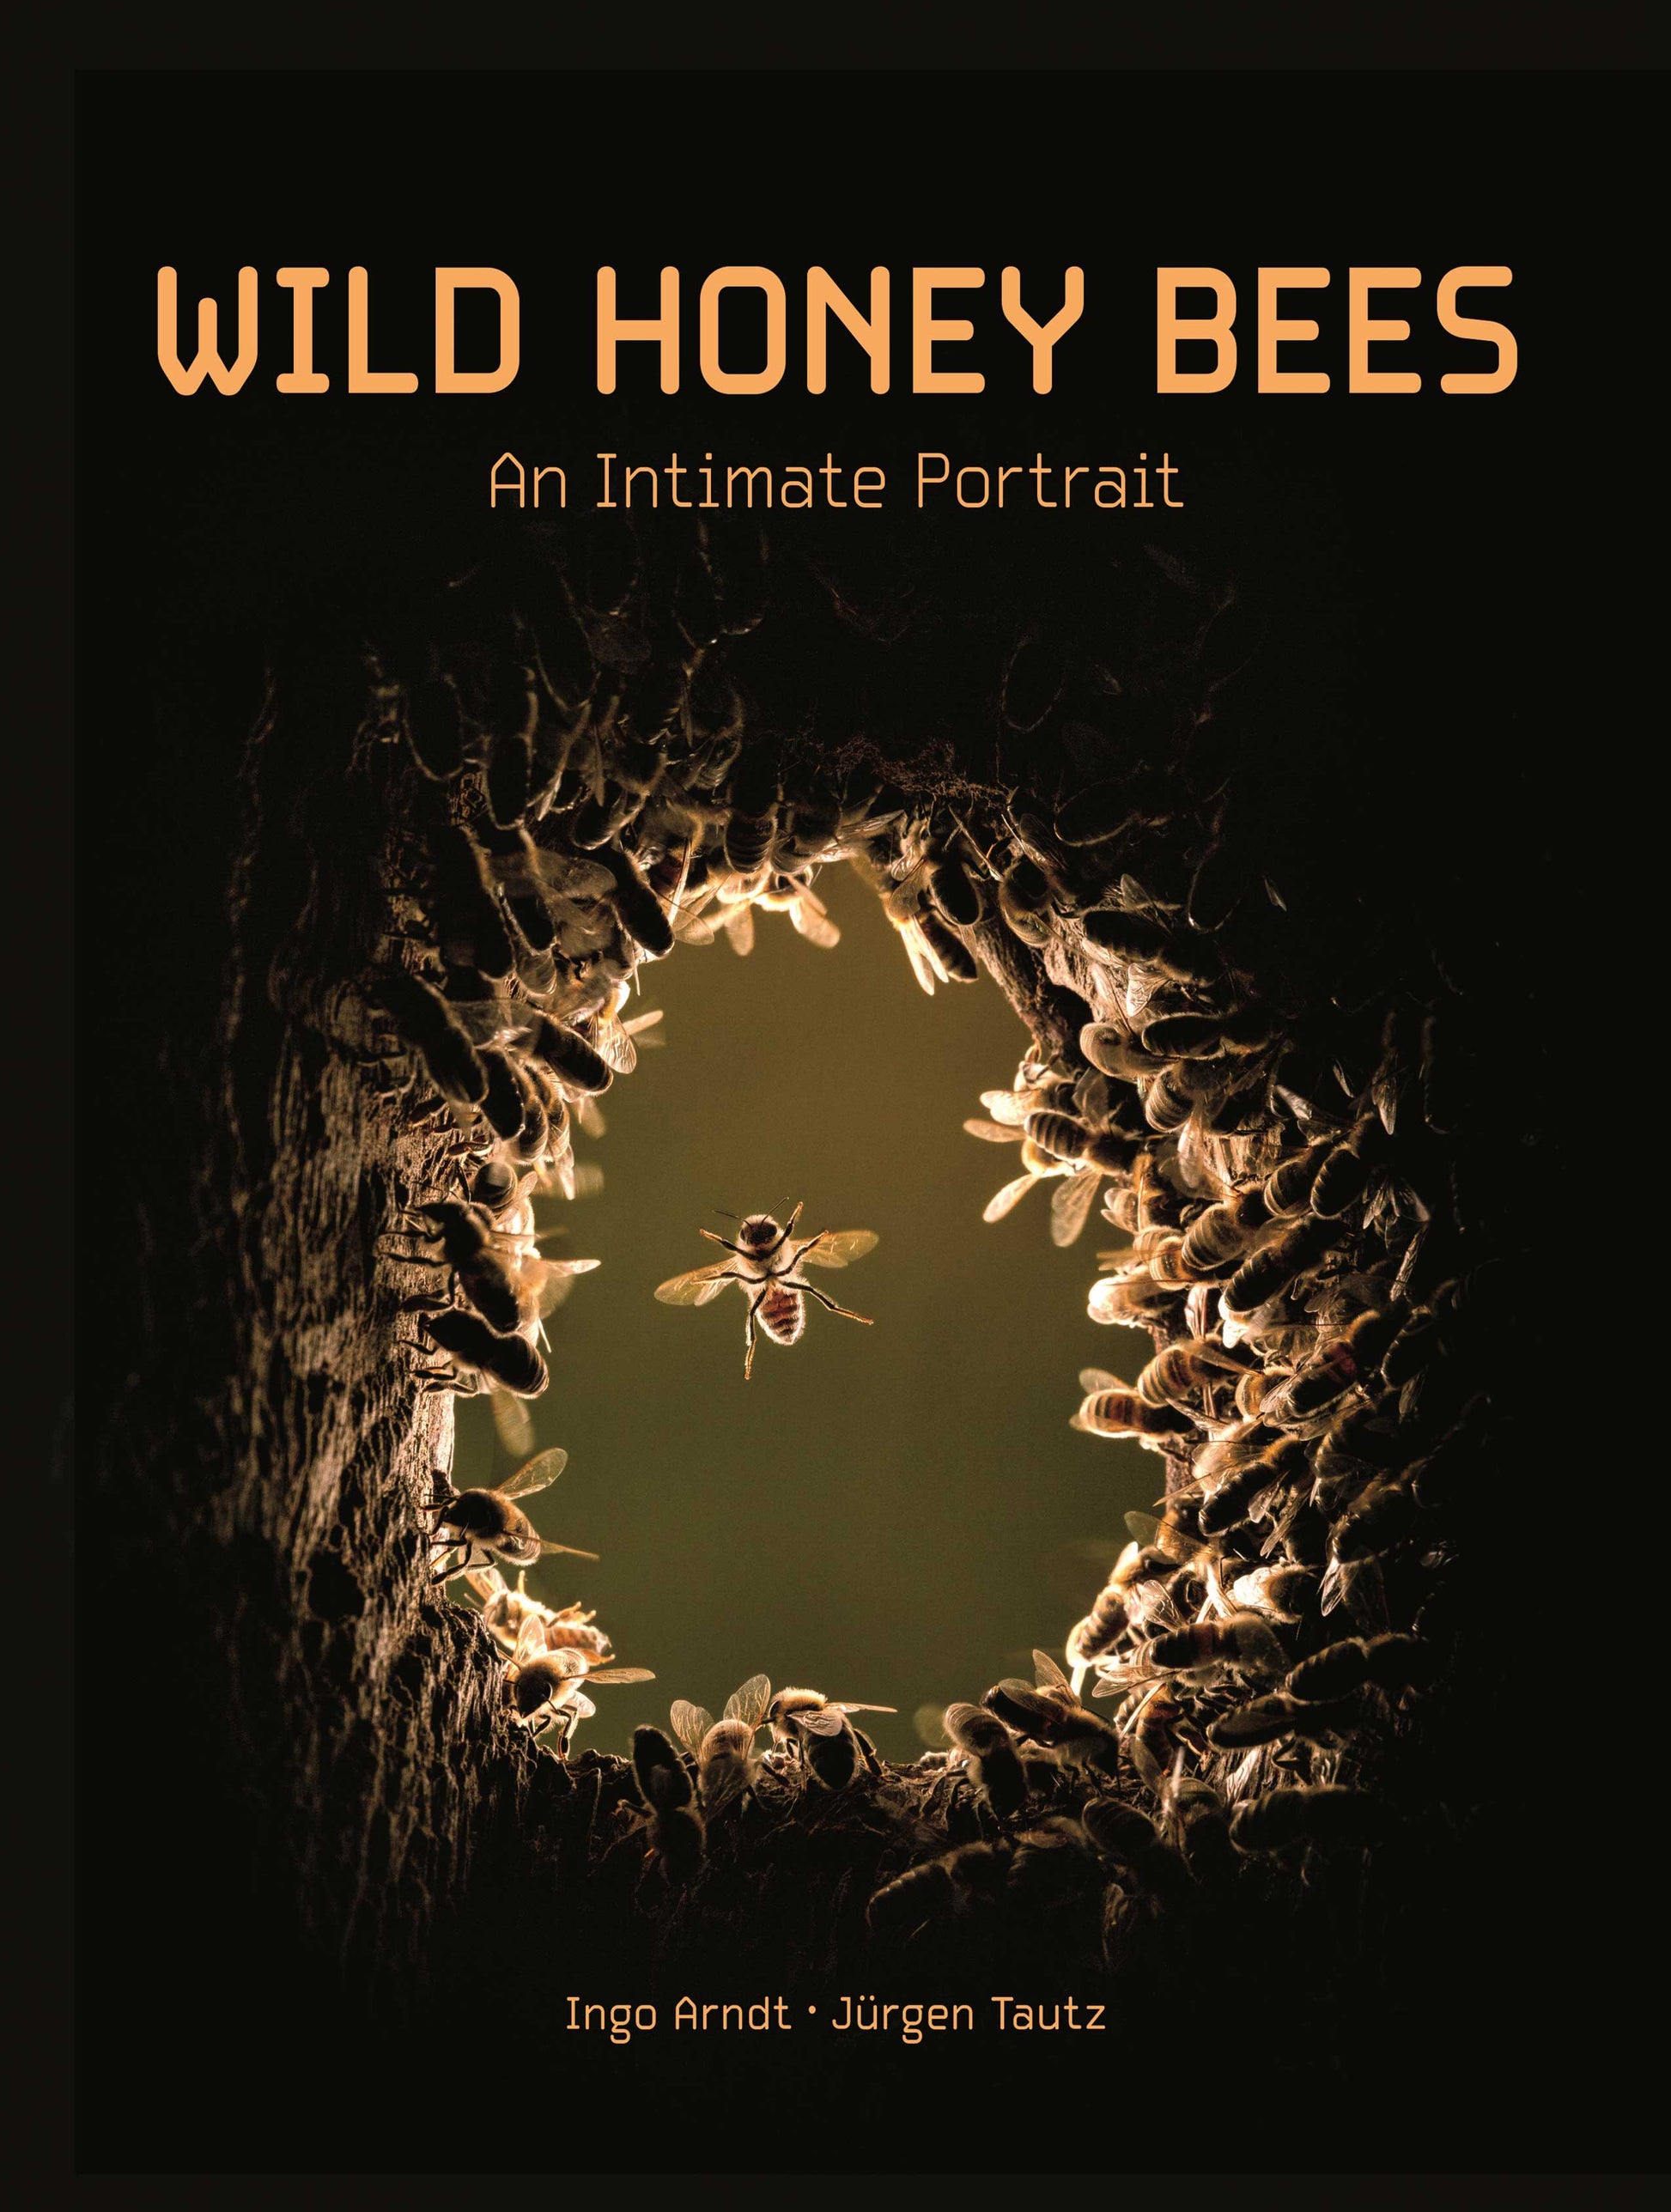 Wild Honey Bees: An Intimate Portrait book with photo of bee flying inside beehive on front cover